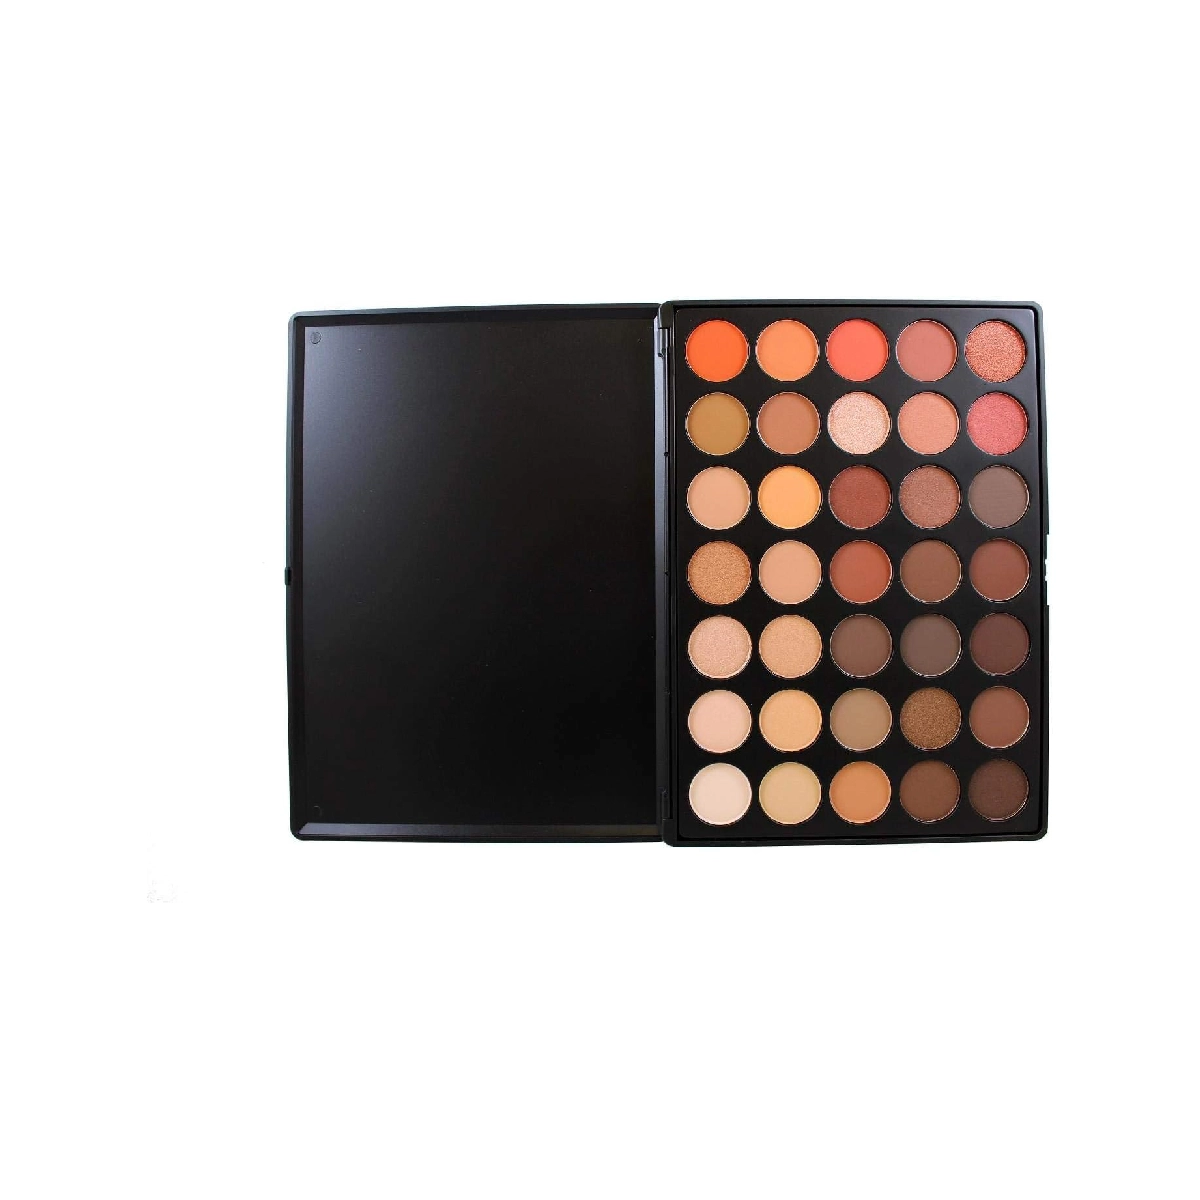 Morphe Brushes 350 Palette - diverse eyeshadow colors on a white background.